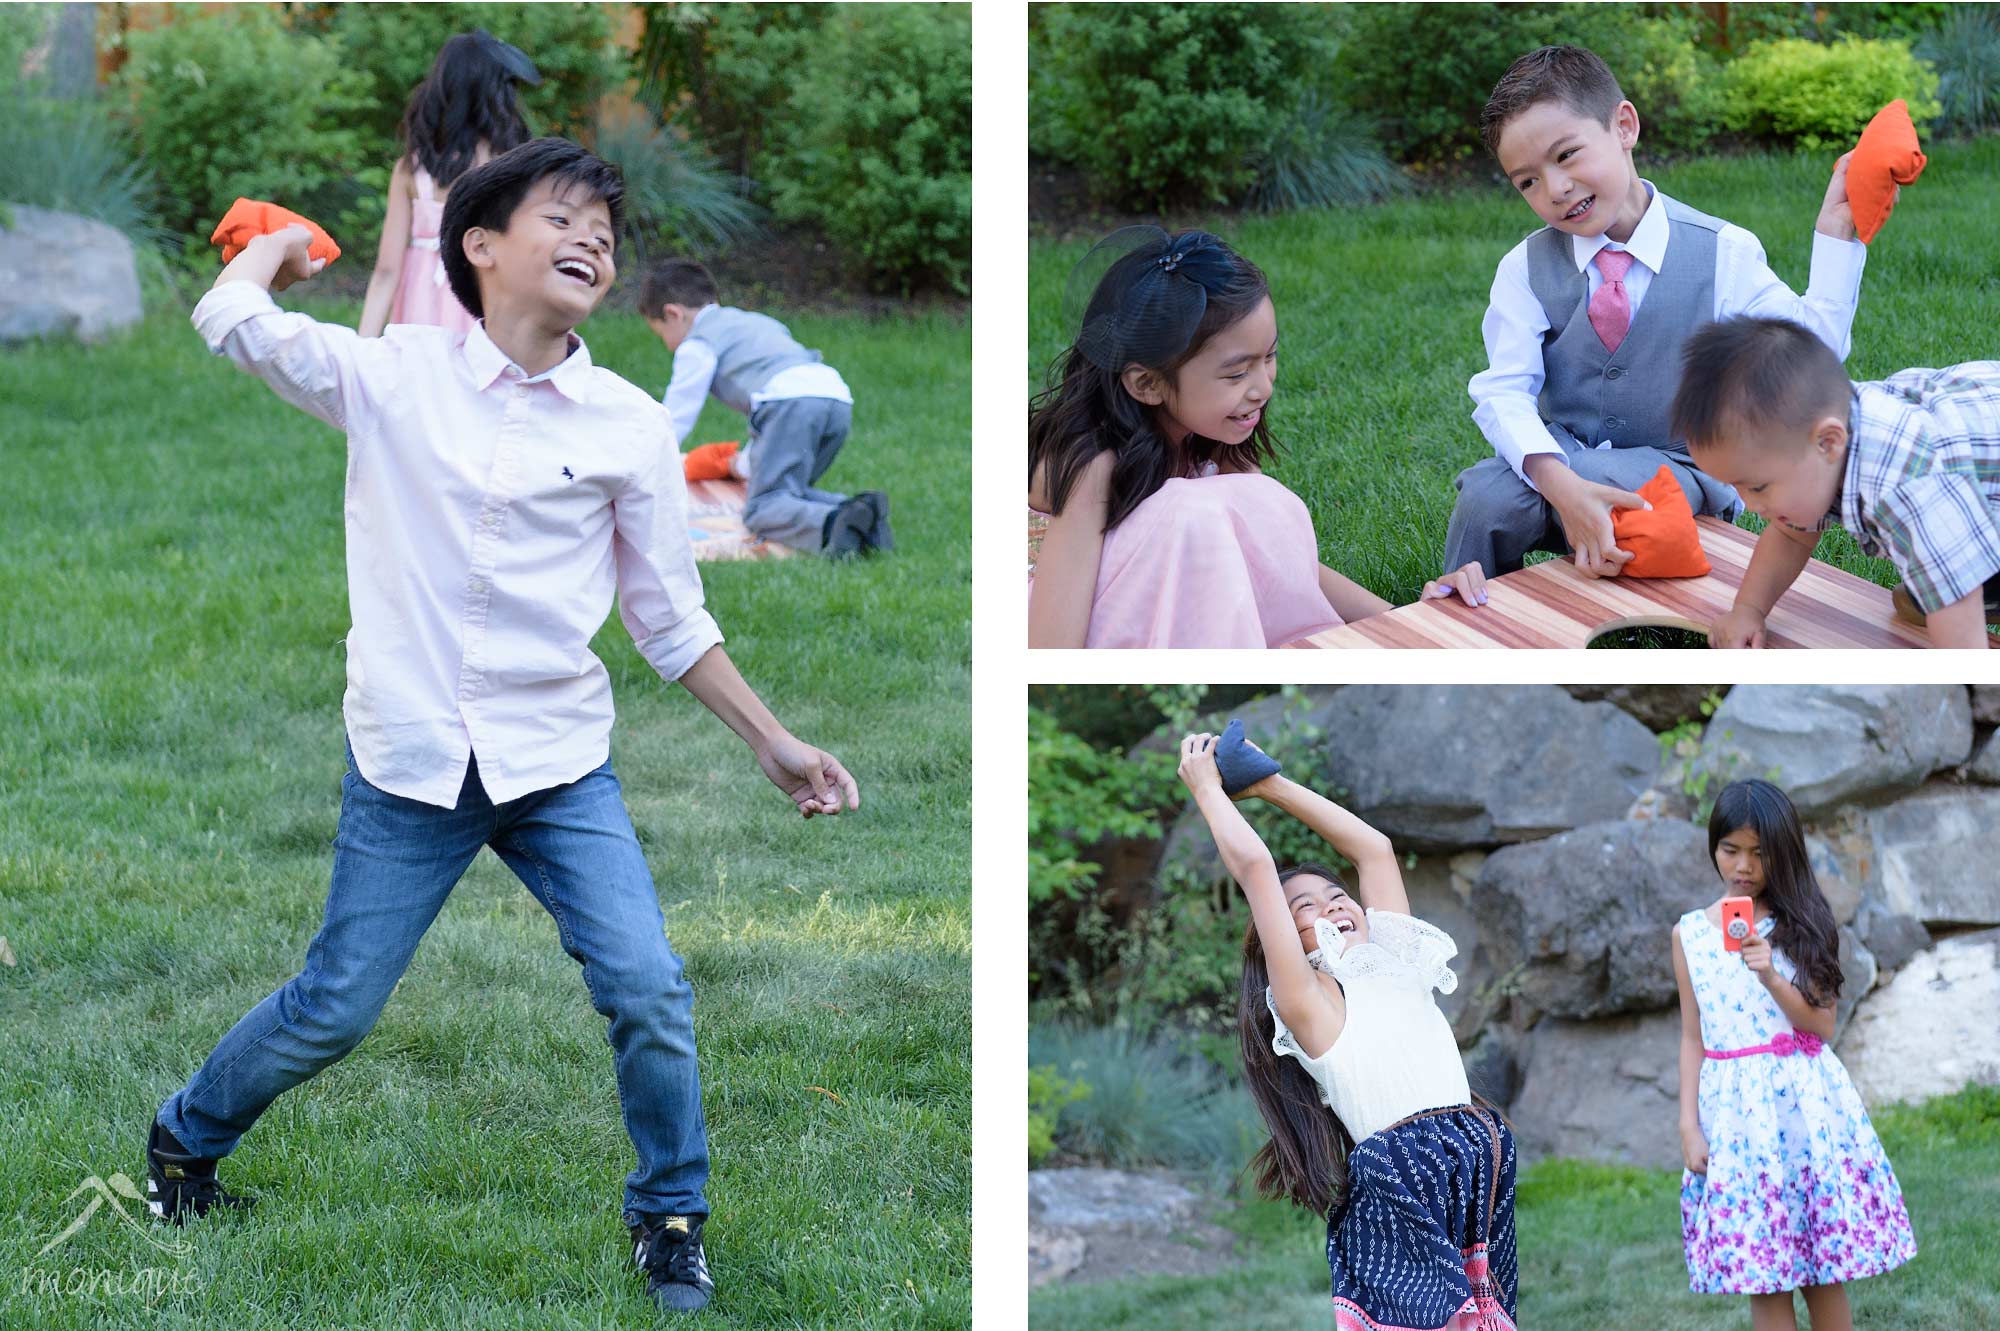 Squaw valley wedding kids playing lawn games